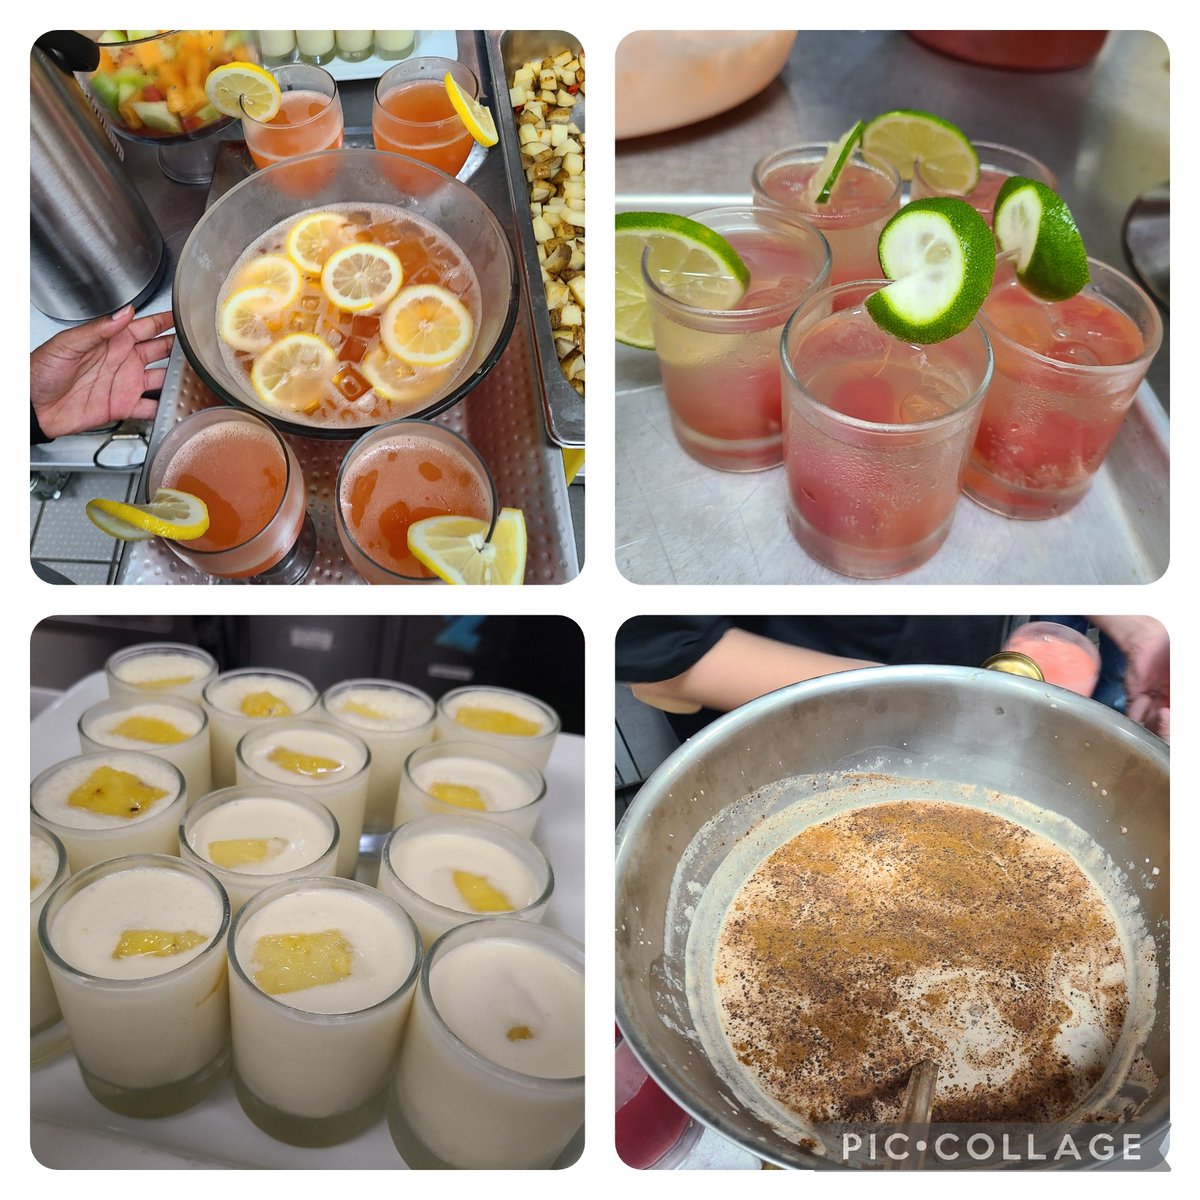 Breakfast catering for school advisory committee (thanks to 3 students for coming at 630am) followed by our annual mocktail lesson.  Just 9 class days remaining!  #madeinprostart #CTEinSC @JimStill23 @rtcgwd @Gwd50Schools 

More pics FB and IG